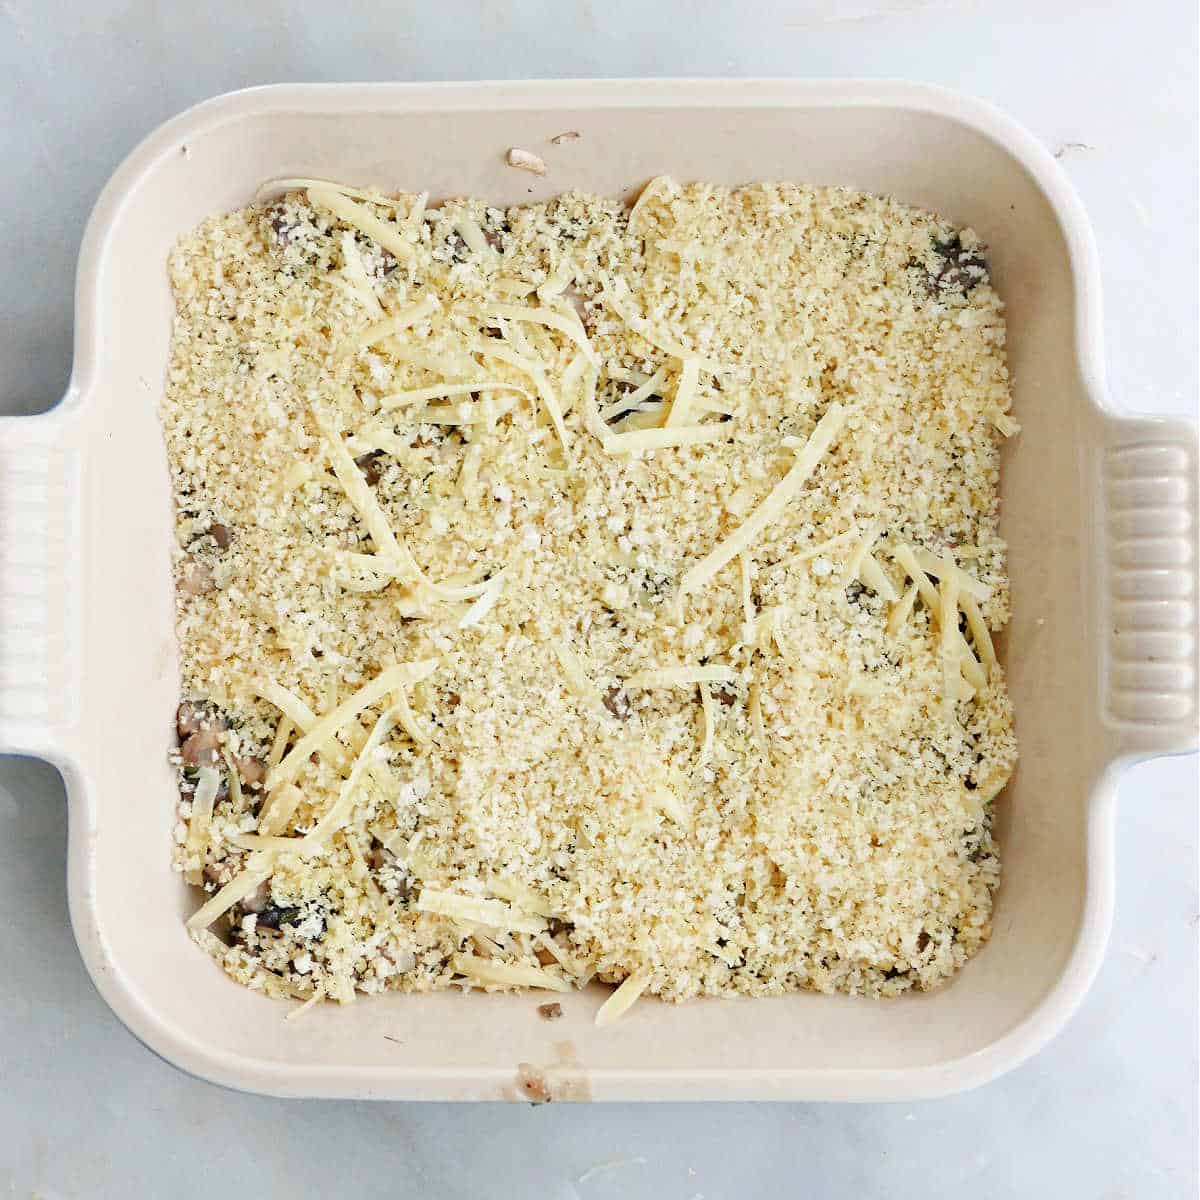 mushroom gratin filling topped with bread crumbs and cheese in a dish